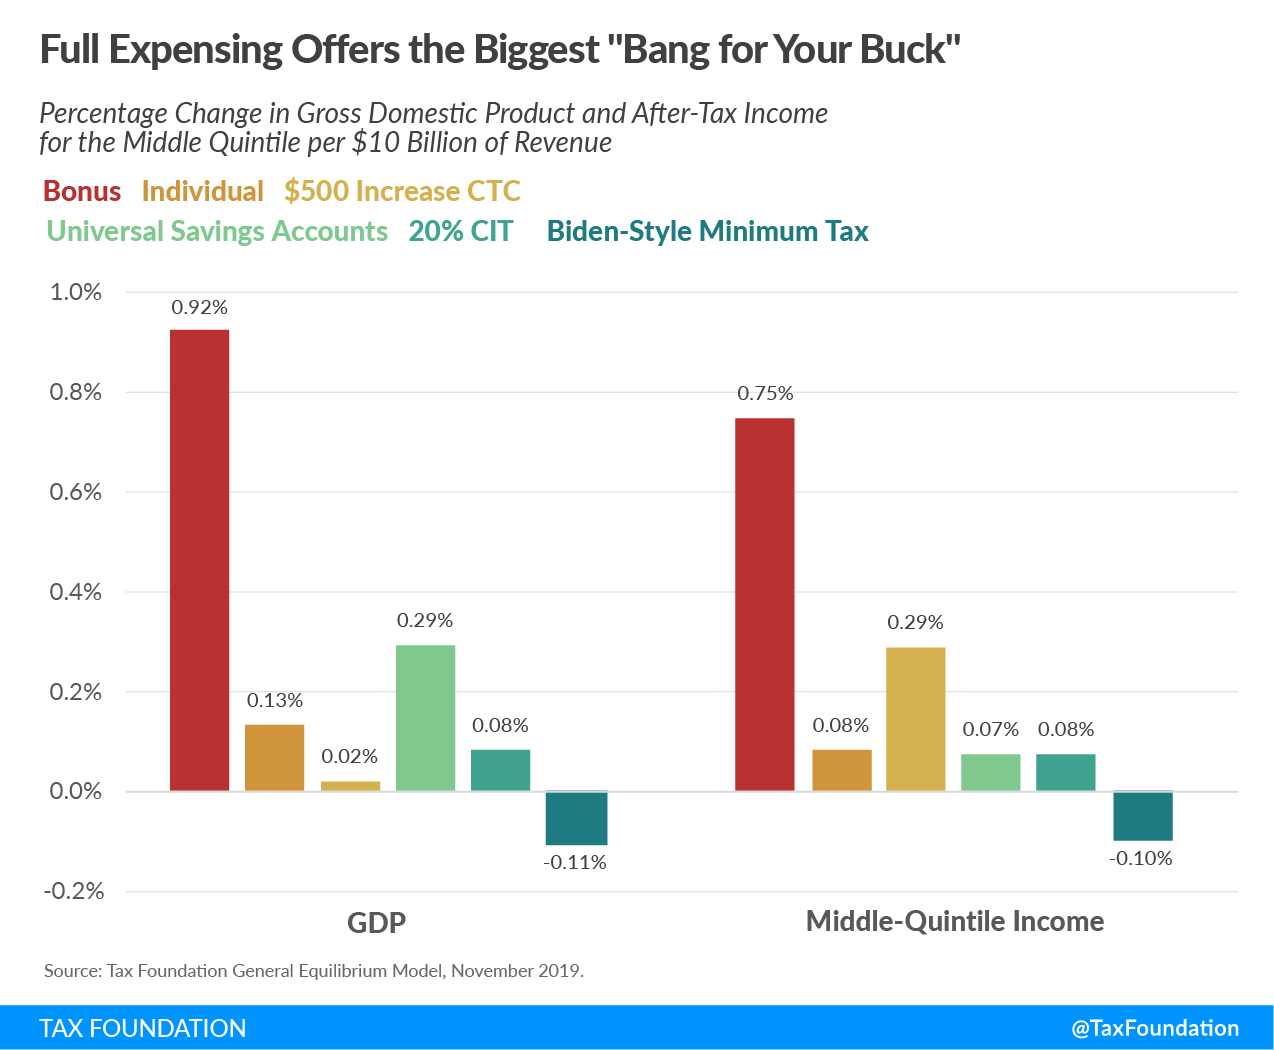 Full expensing offers biggest "bank for your buck" for new tax reform options. 100 percent bonus depreciation, individual income tax cut, corporate tax increase, universal savings accounts, corporate tax cut, and Biden-style minimum income tax